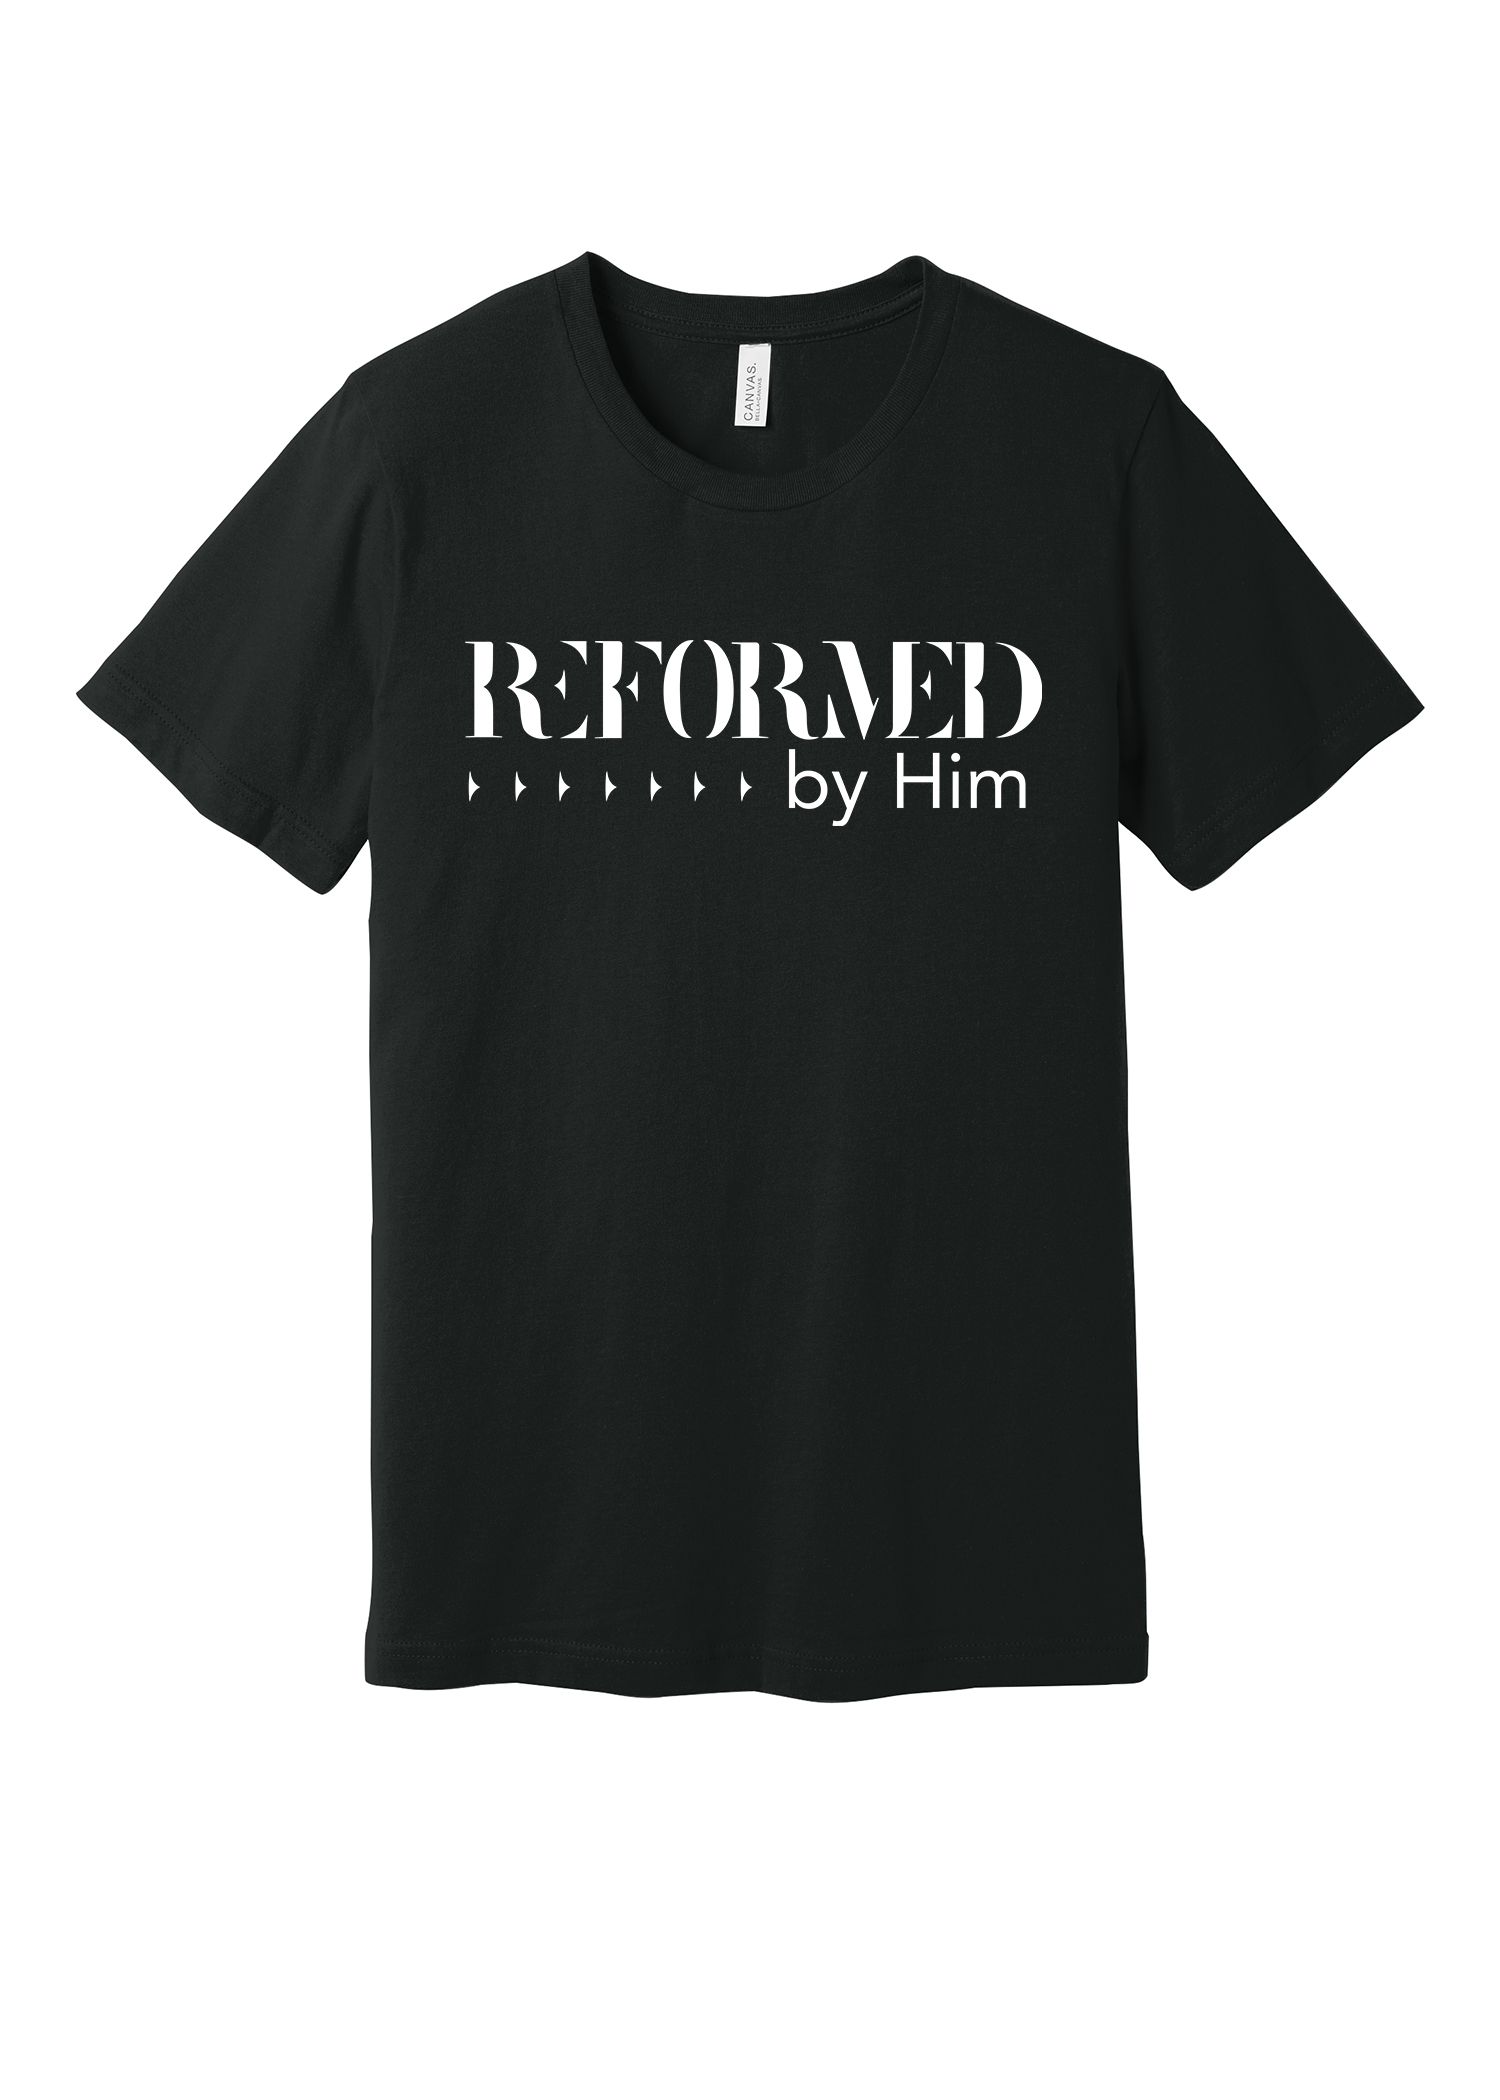 By Ring Spun T-Shirt - Reformed By Him